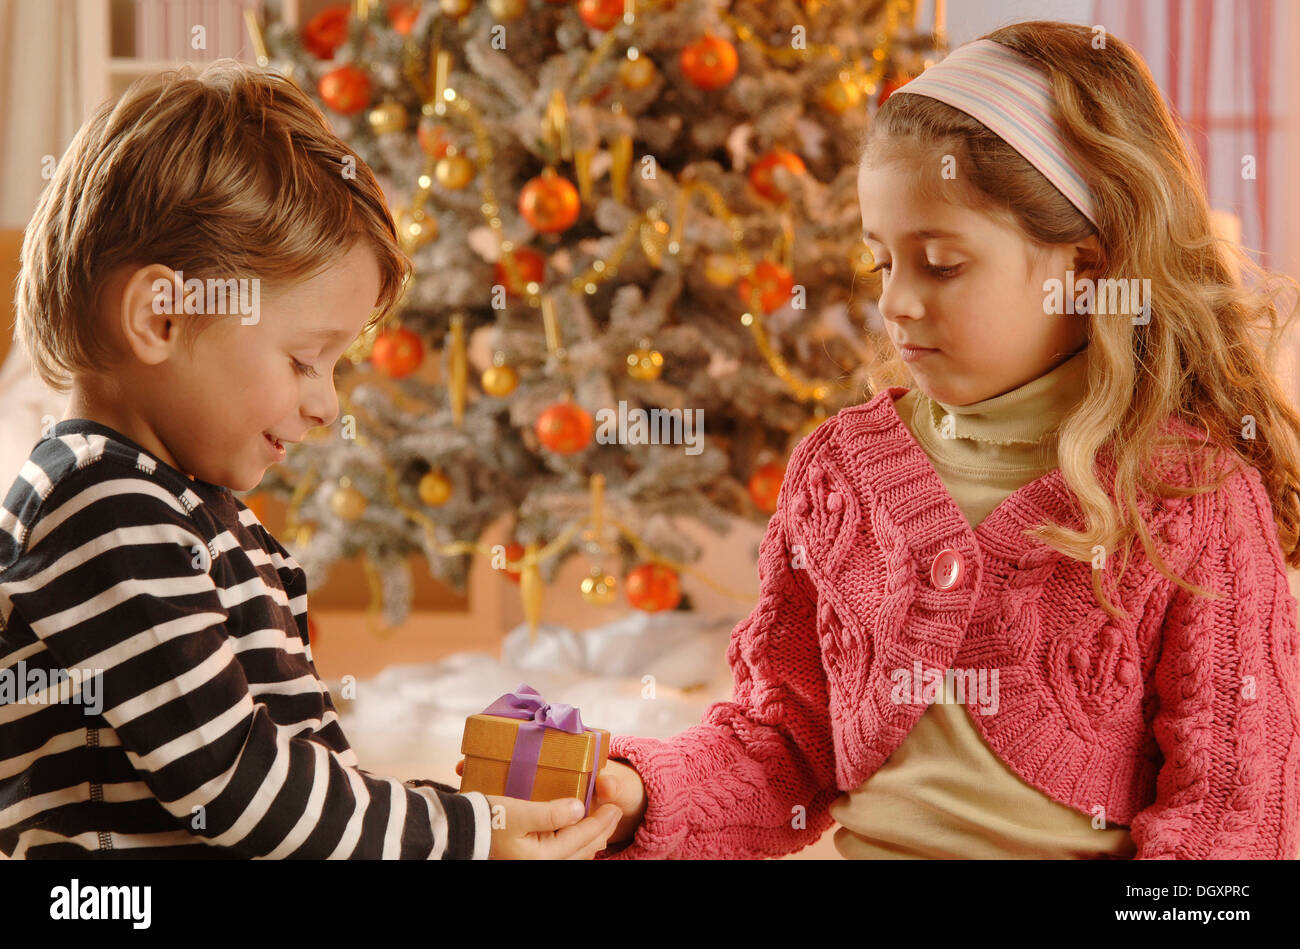 Girl giving a boy a Christmas gift in front of a Christmas tree Stock Photo